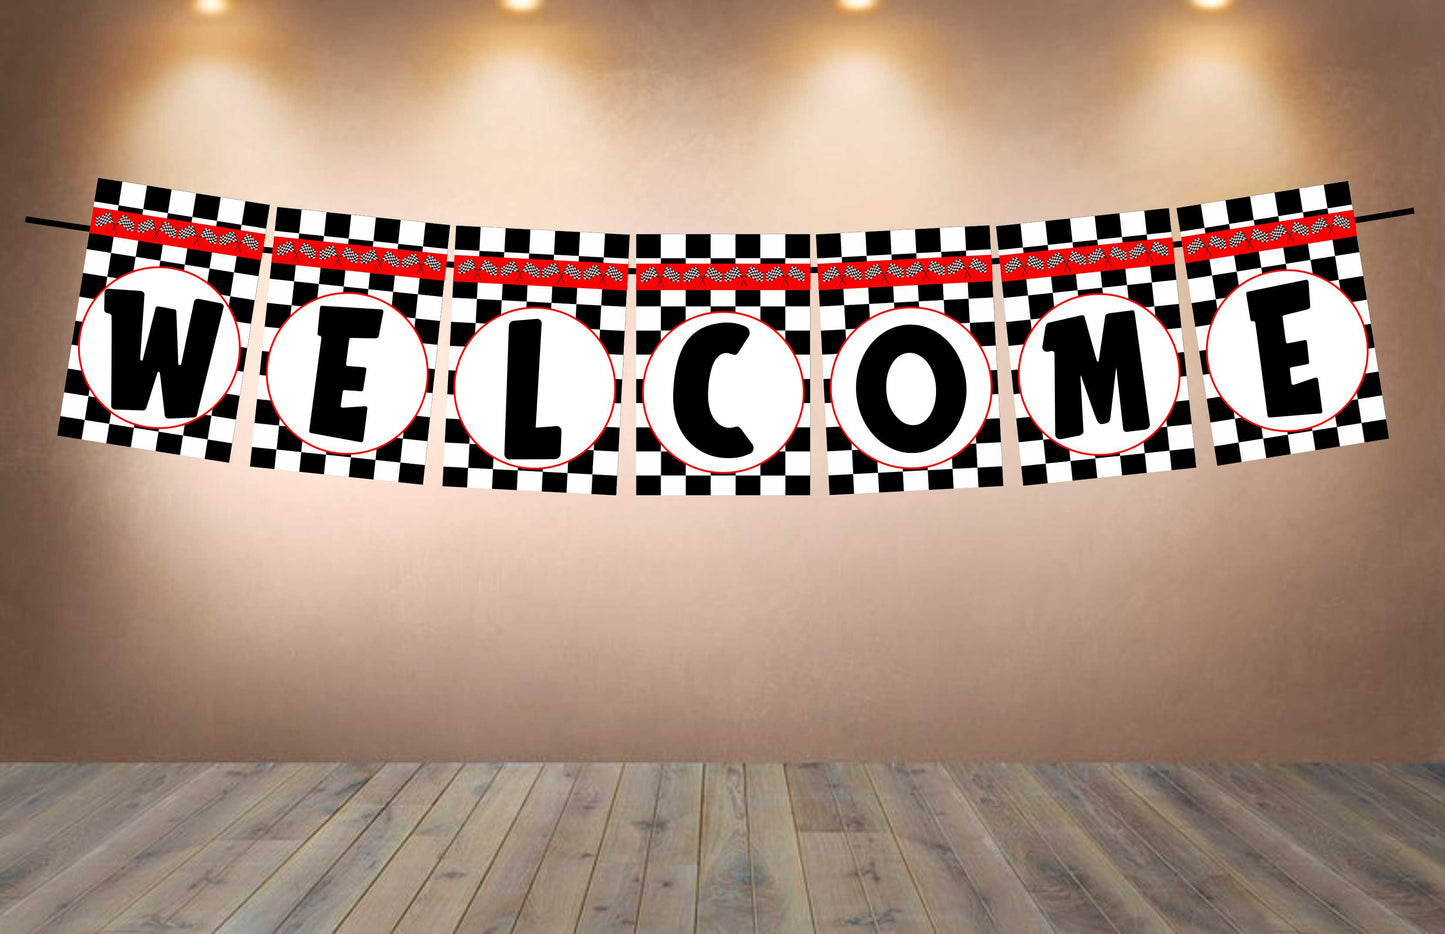 Racing Theme Welcome Banner for Party Entrance Home Welcoming Birthday Decoration Party Item